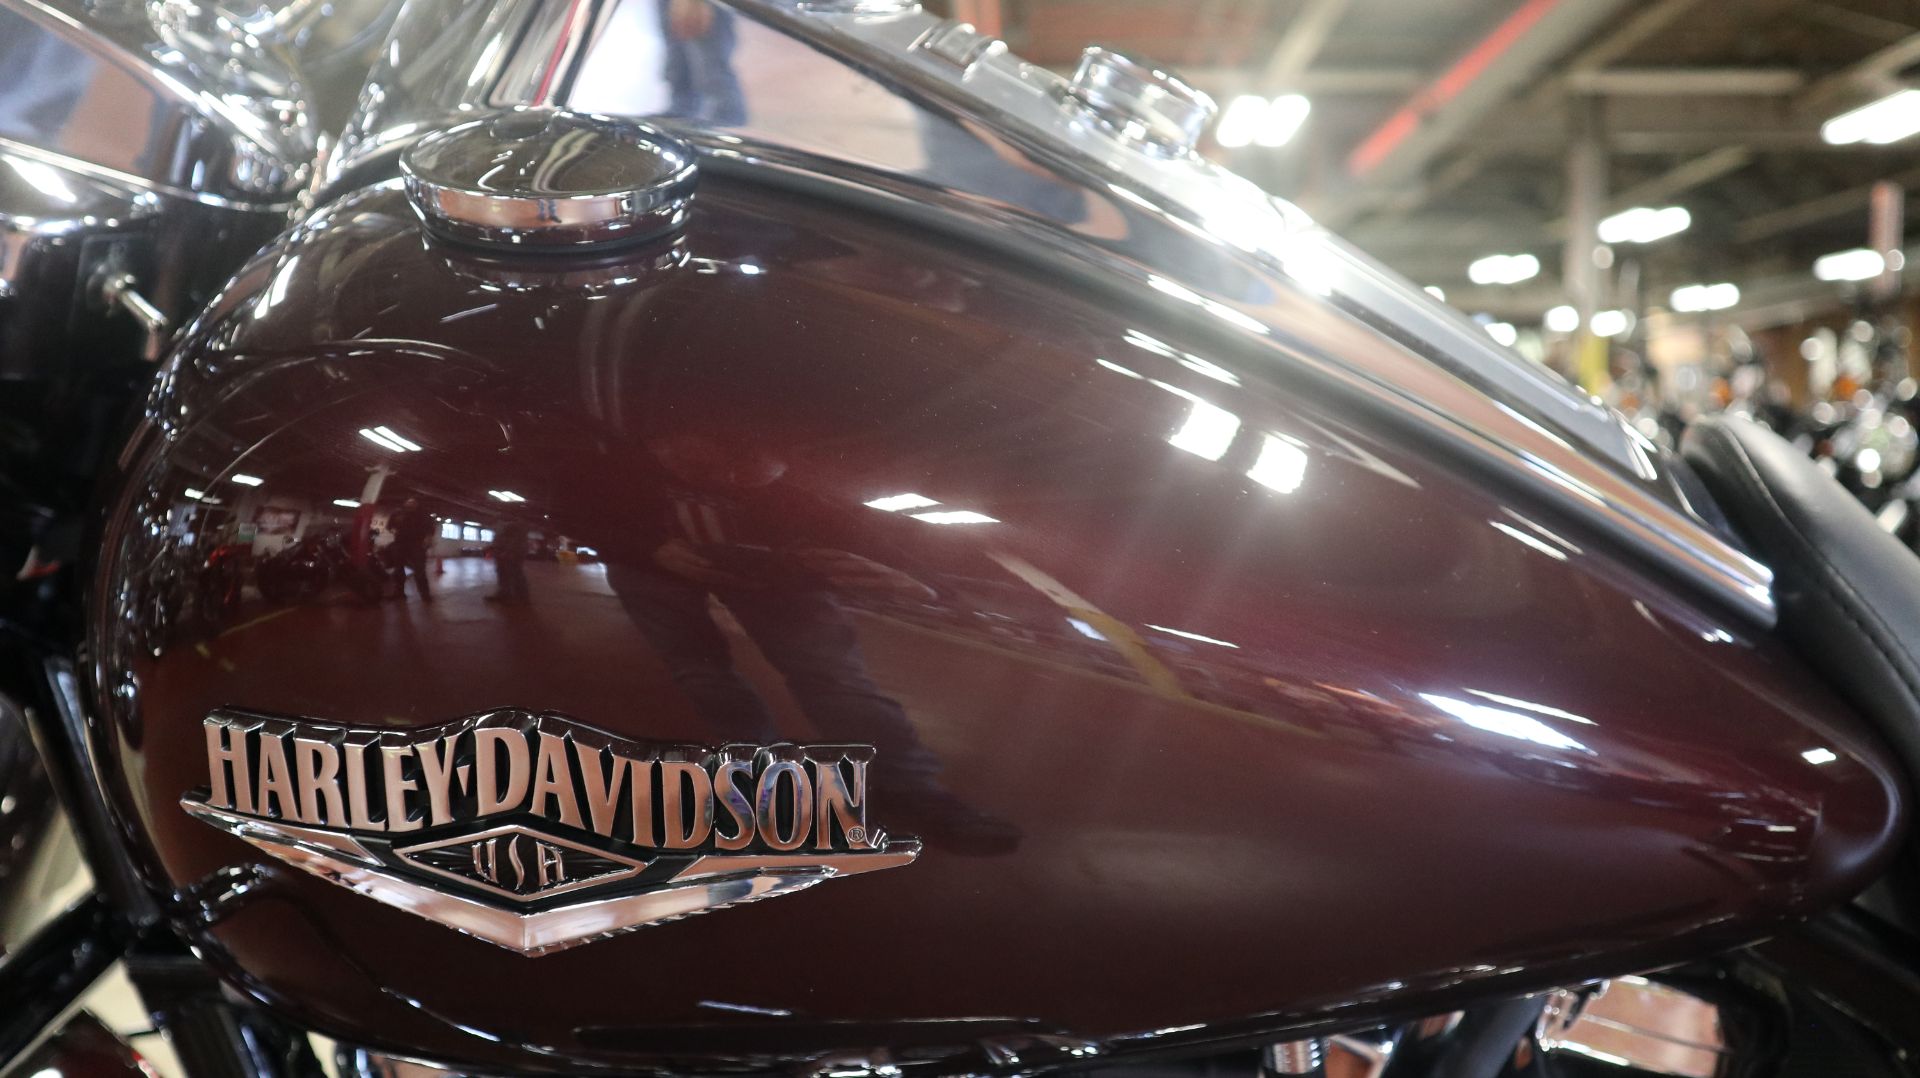 2022 Harley-Davidson Road King® in New London, Connecticut - Photo 11